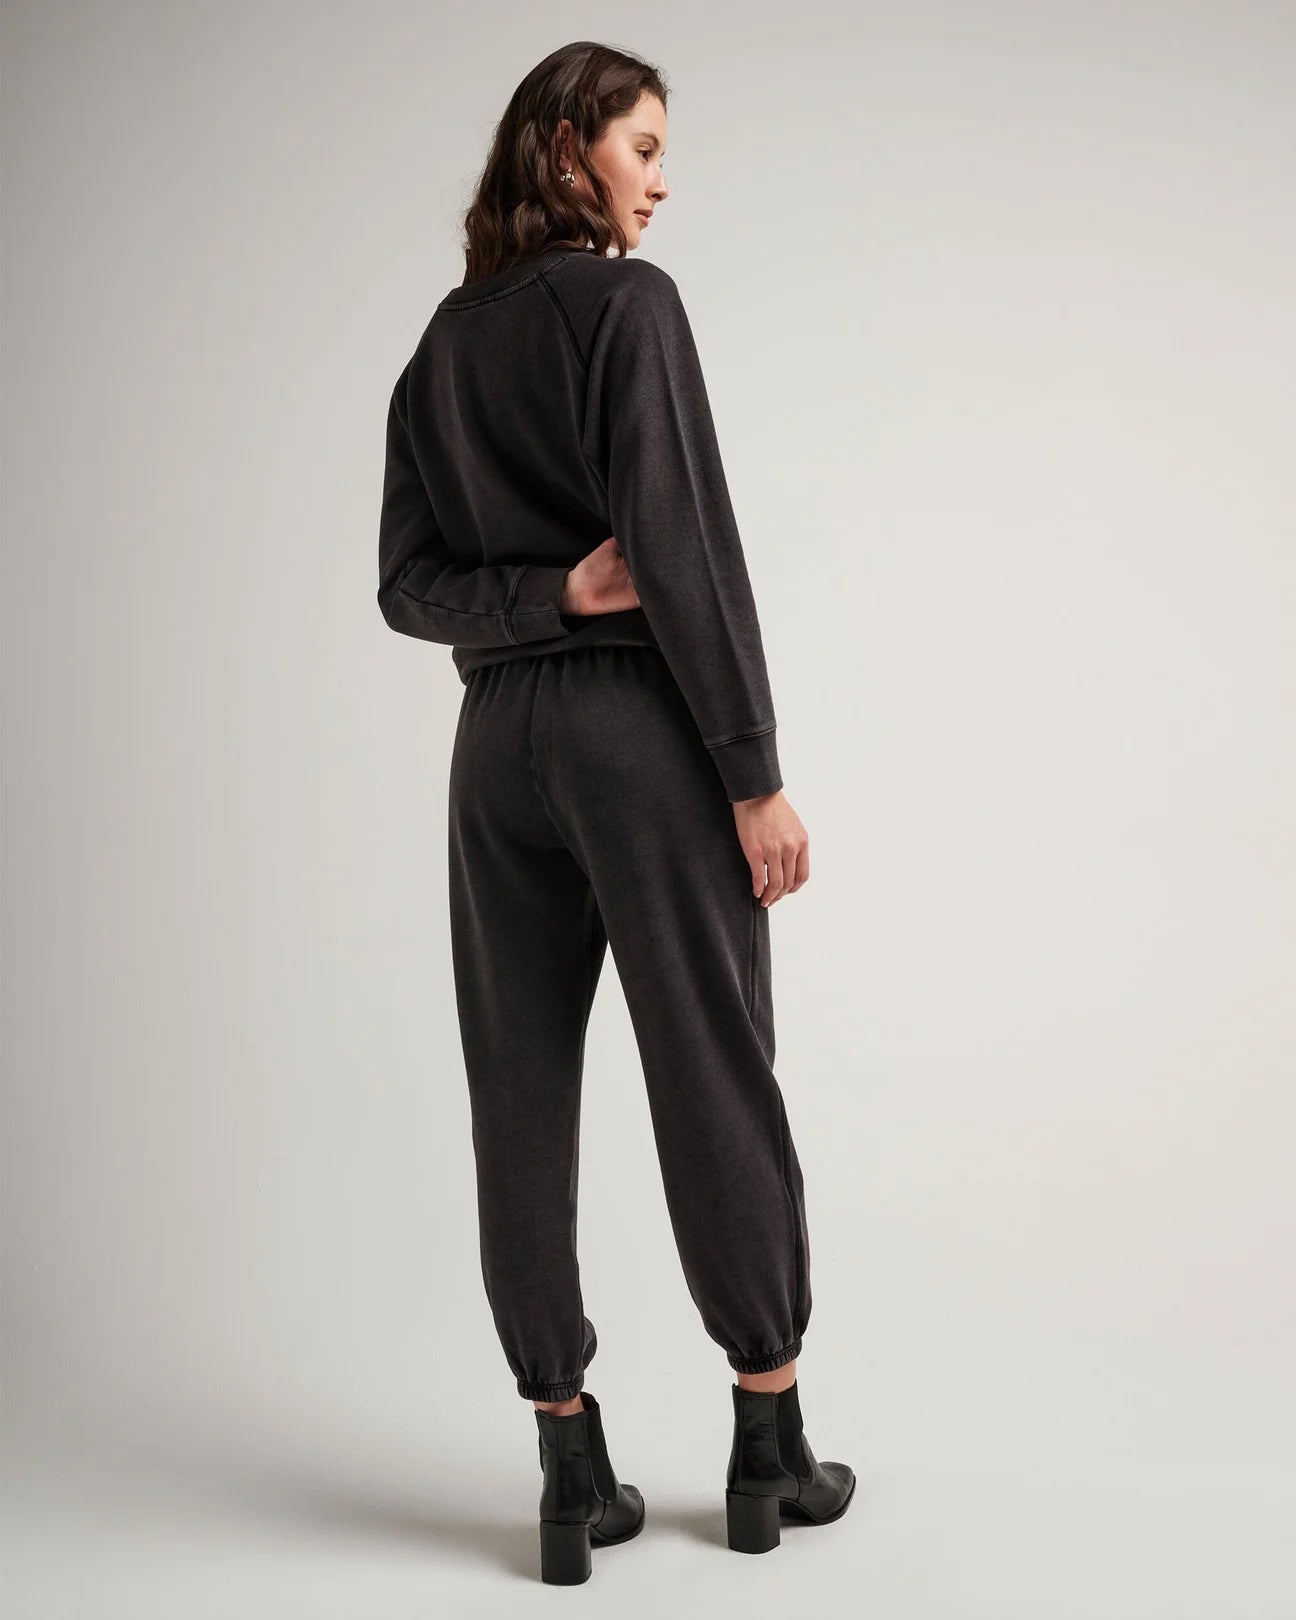 Recycled Fleece Sweatpant in Mineral | Richer Poorer